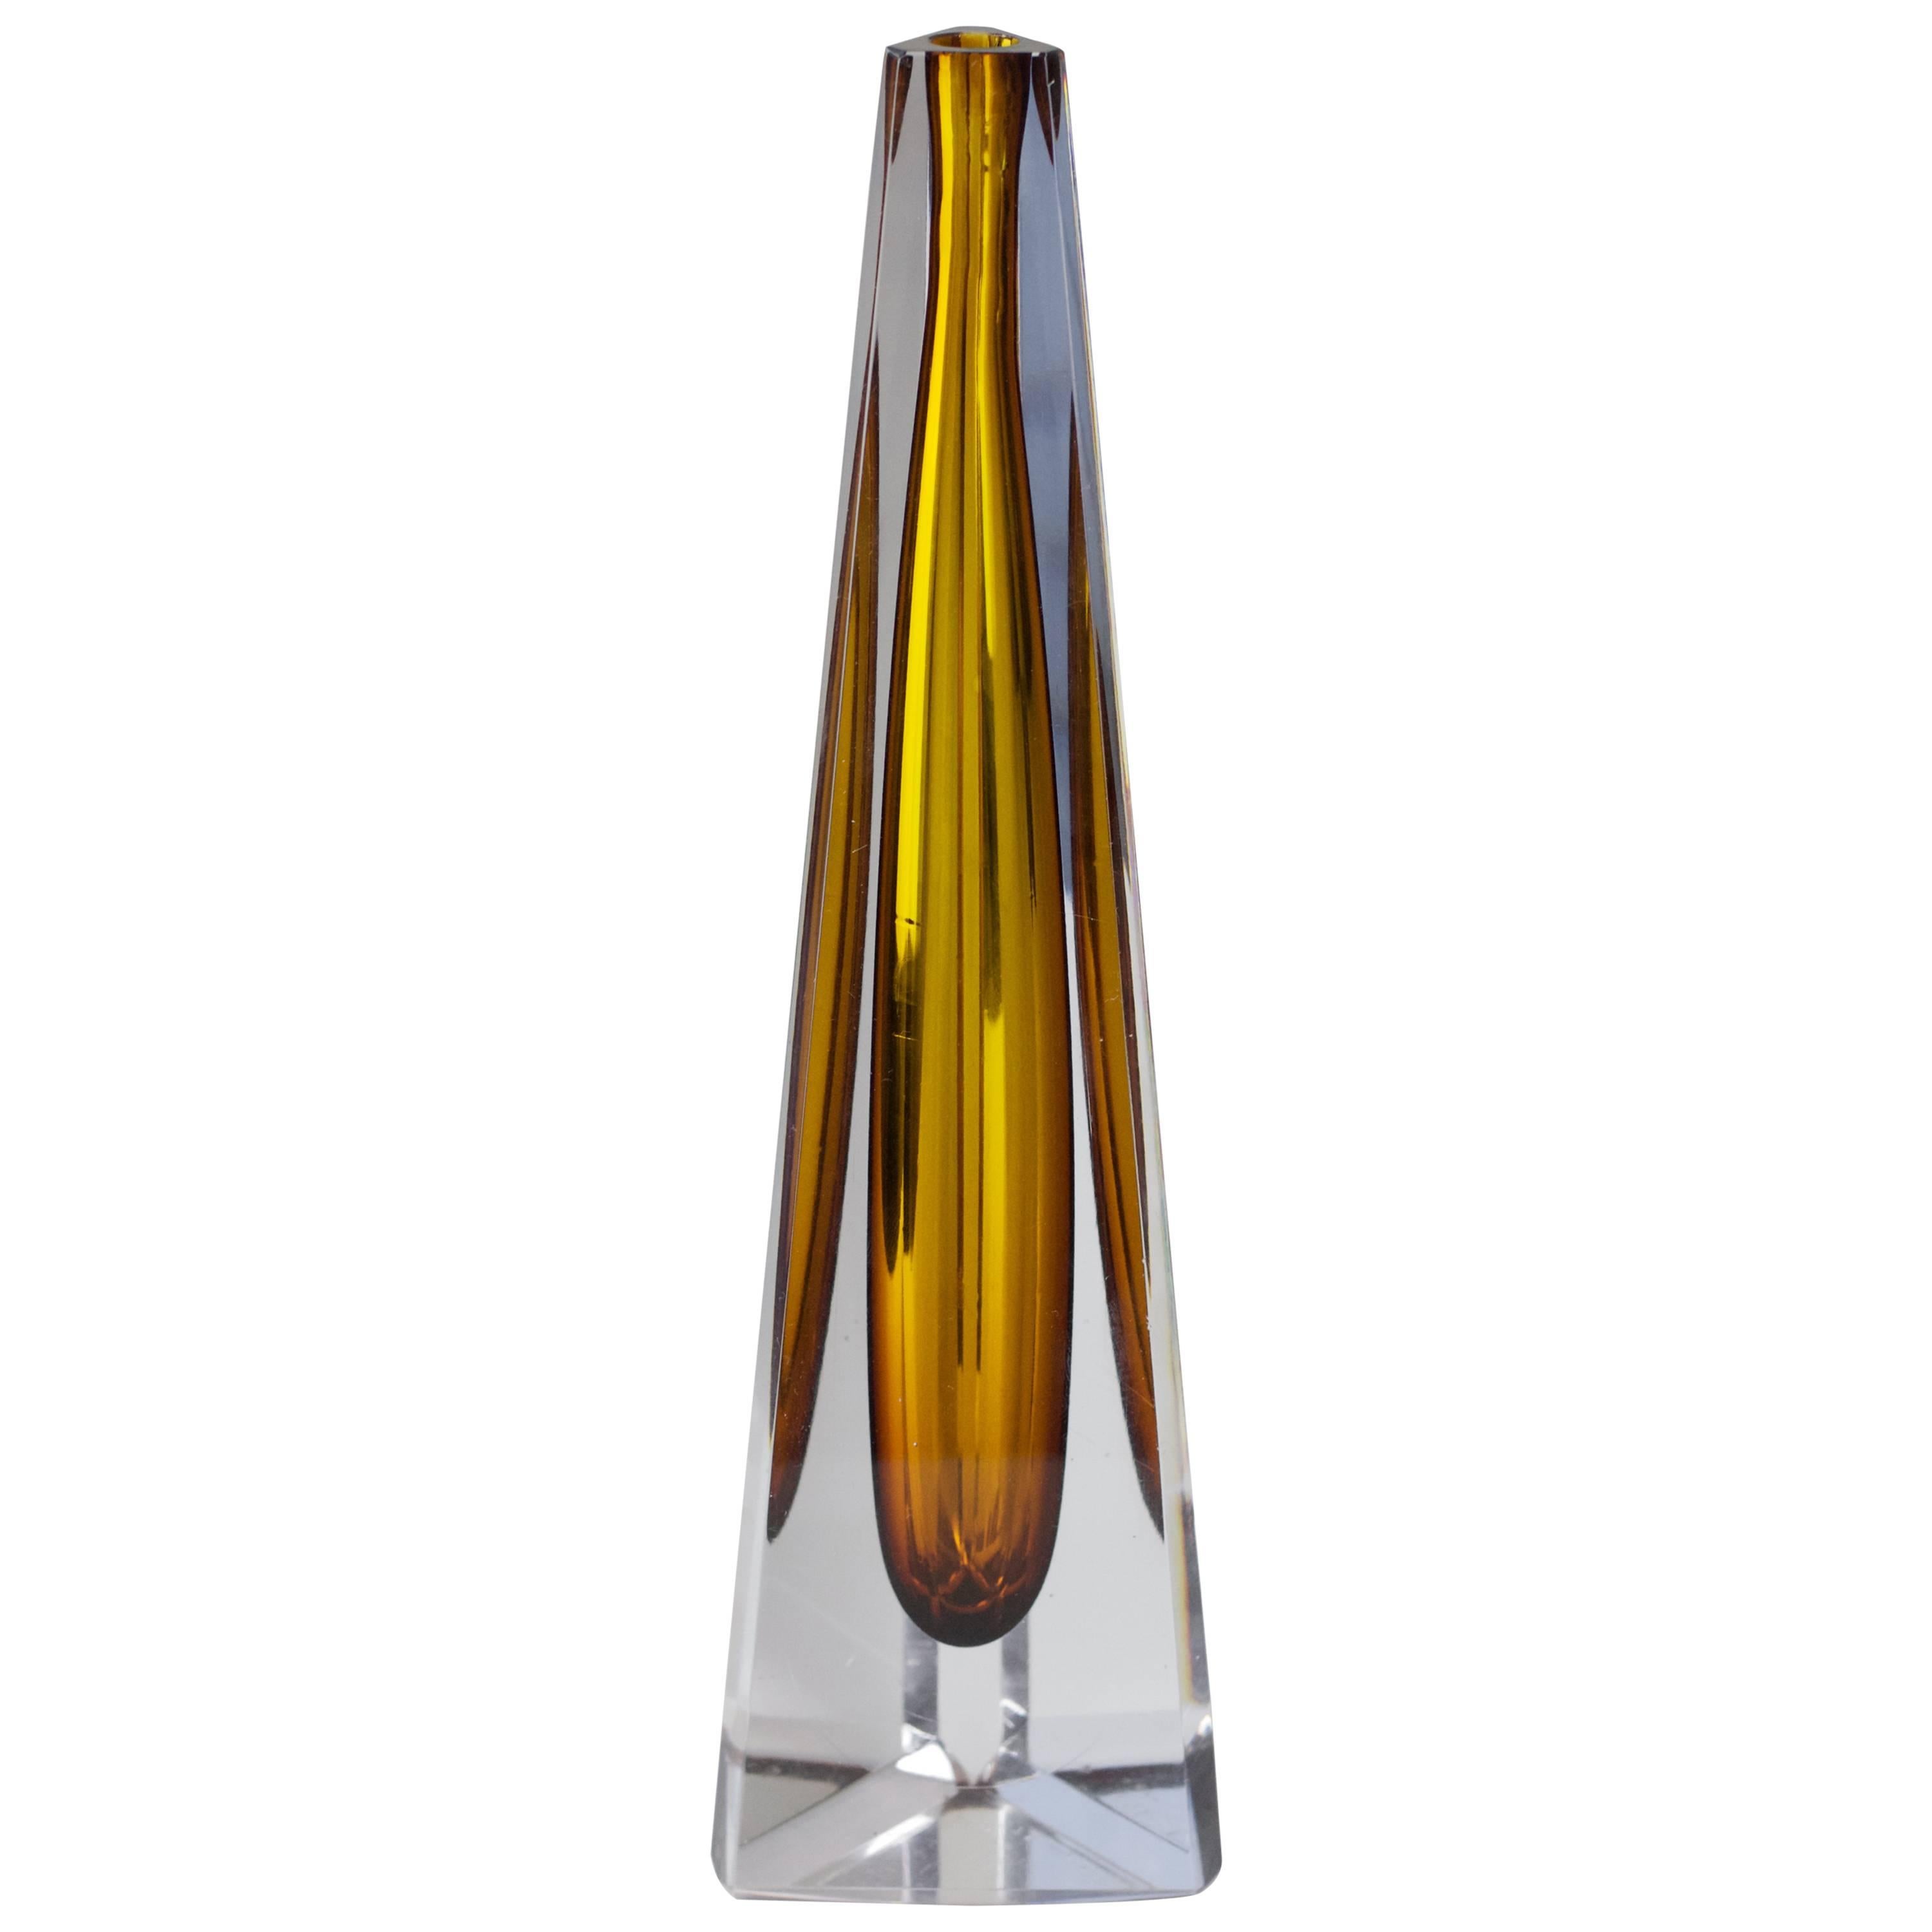 Tall 1950s Faceted Sommerso Vase Signed by Vicke Lindstrand for Kosta Glass